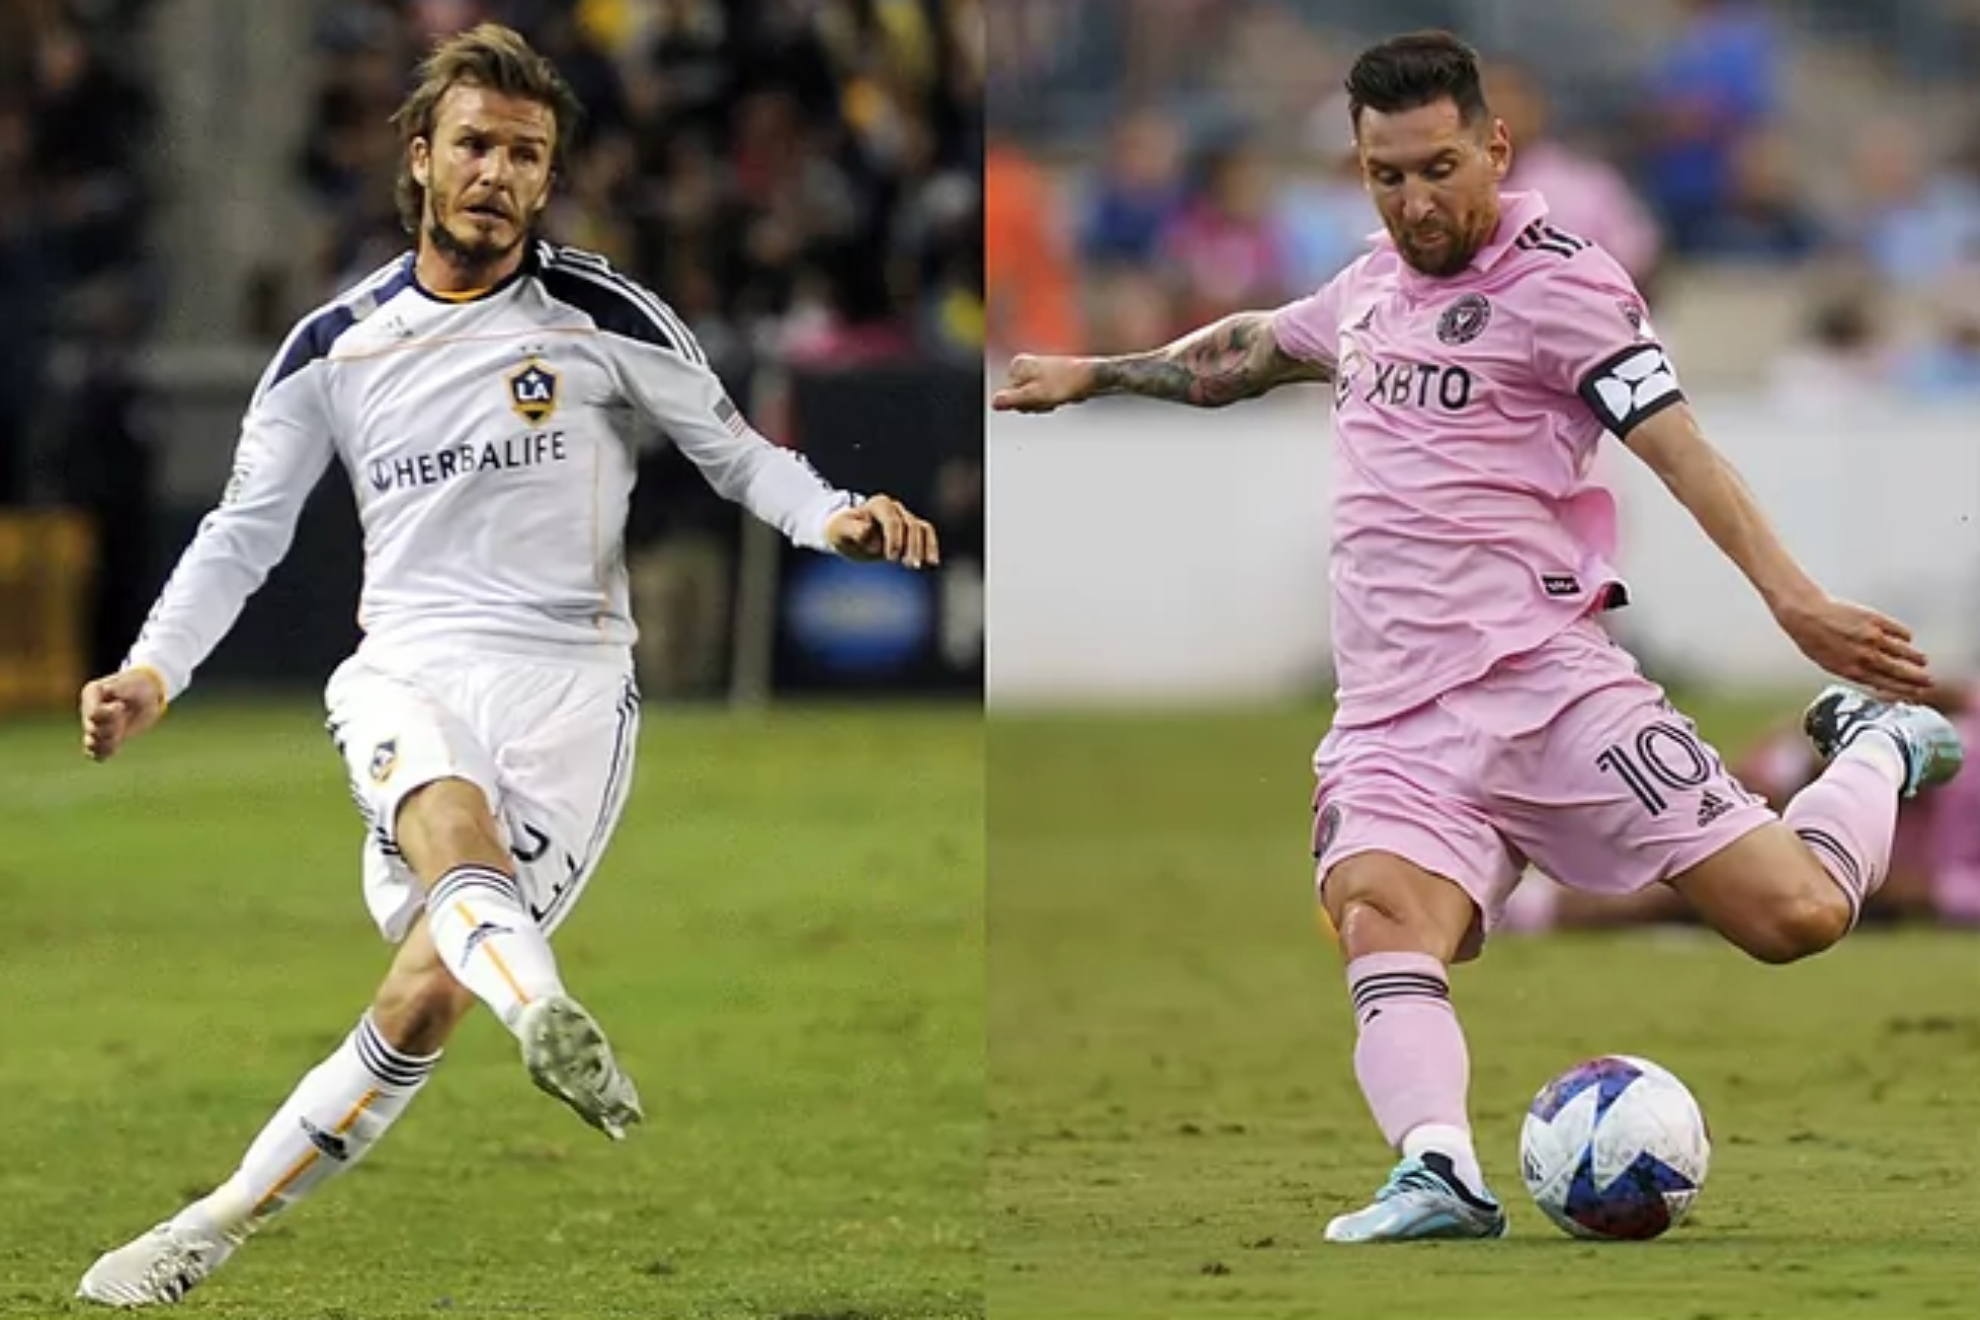 Messi's impact on MLS is not comparable to Beckham's arrival: What was the difference?